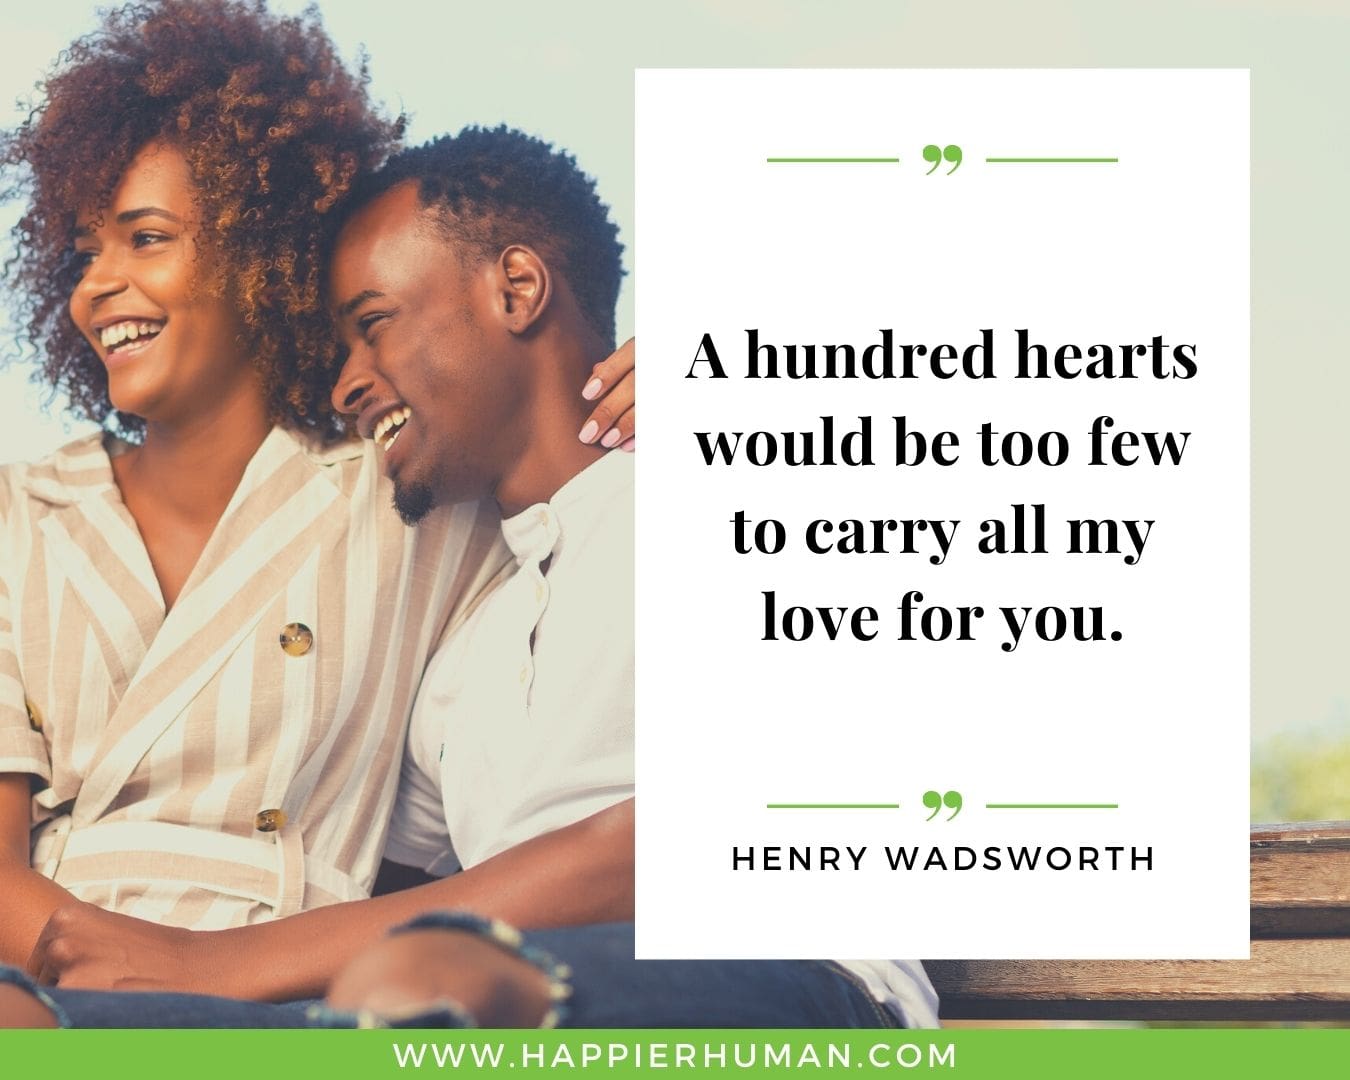 Short, Deep Love Quotes for Her - “A hundred hearts would be too few to carry all my love for you.” – Henry Wadsworth